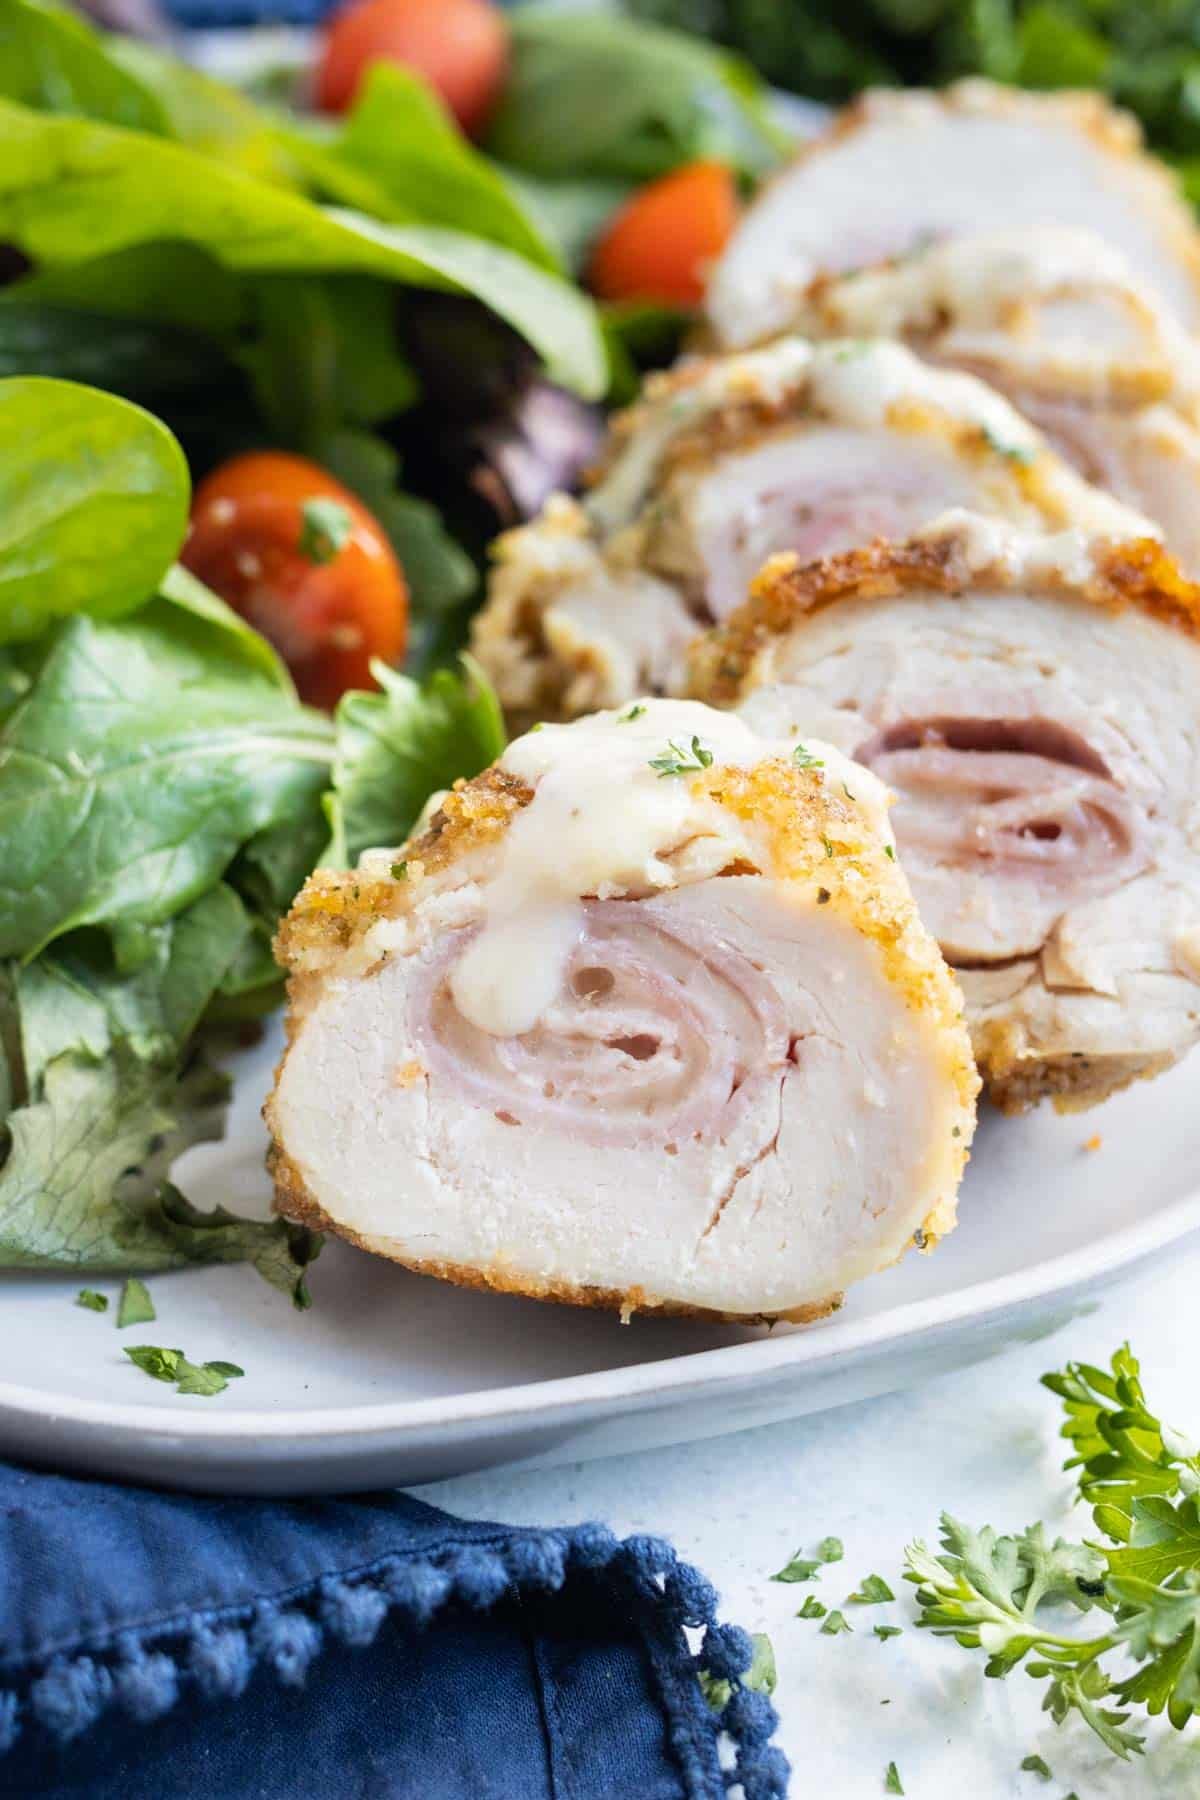 Chicken Cordon Bleu is served with a salad.